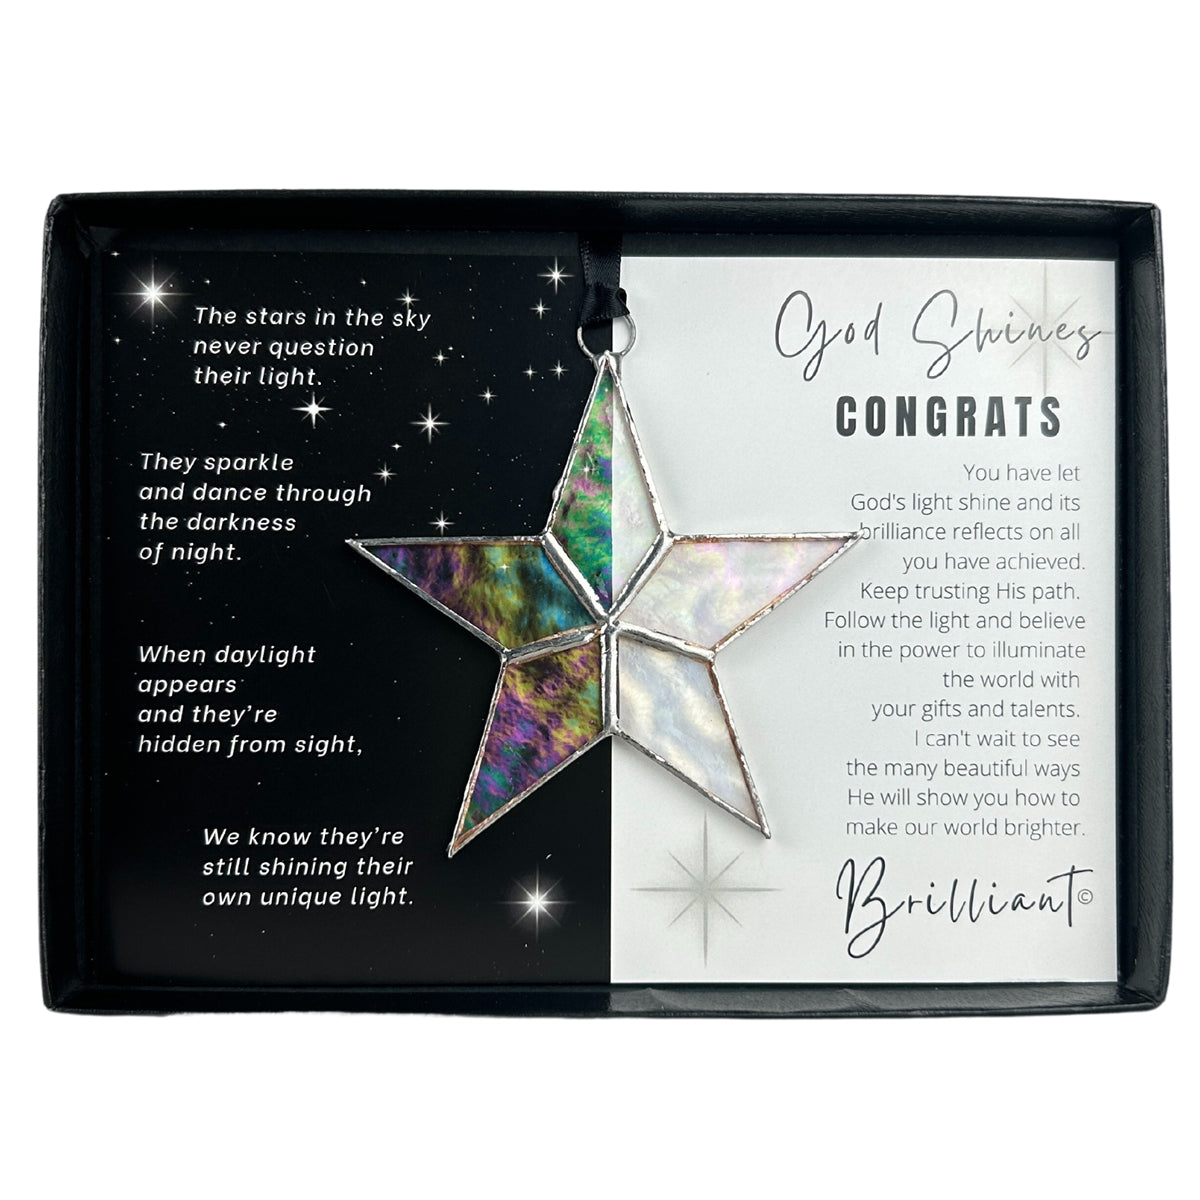 Handmade 4" clear iridescent stained glass star with silver edging, packaged with "God Shines Congrats" sentiment in black gift box with clear lid.